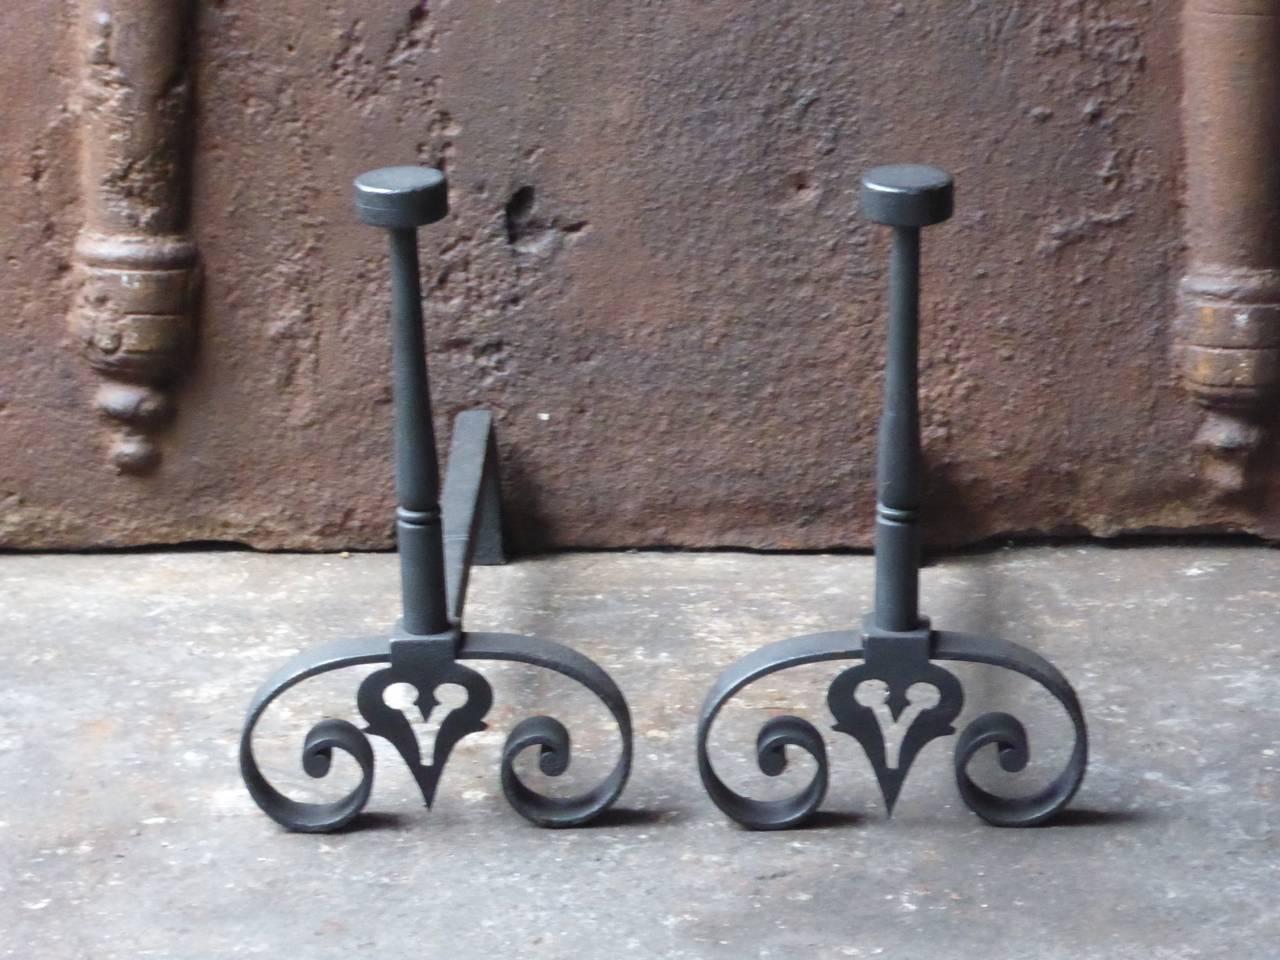 19th century French fire dogs made of wrought iron.

We have a unique and specialized collection of antique and used fireplace accessories consisting of more than 1000 listings at 1stdibs. Amongst others, we always have 300+ firebacks, 250+ pairs of